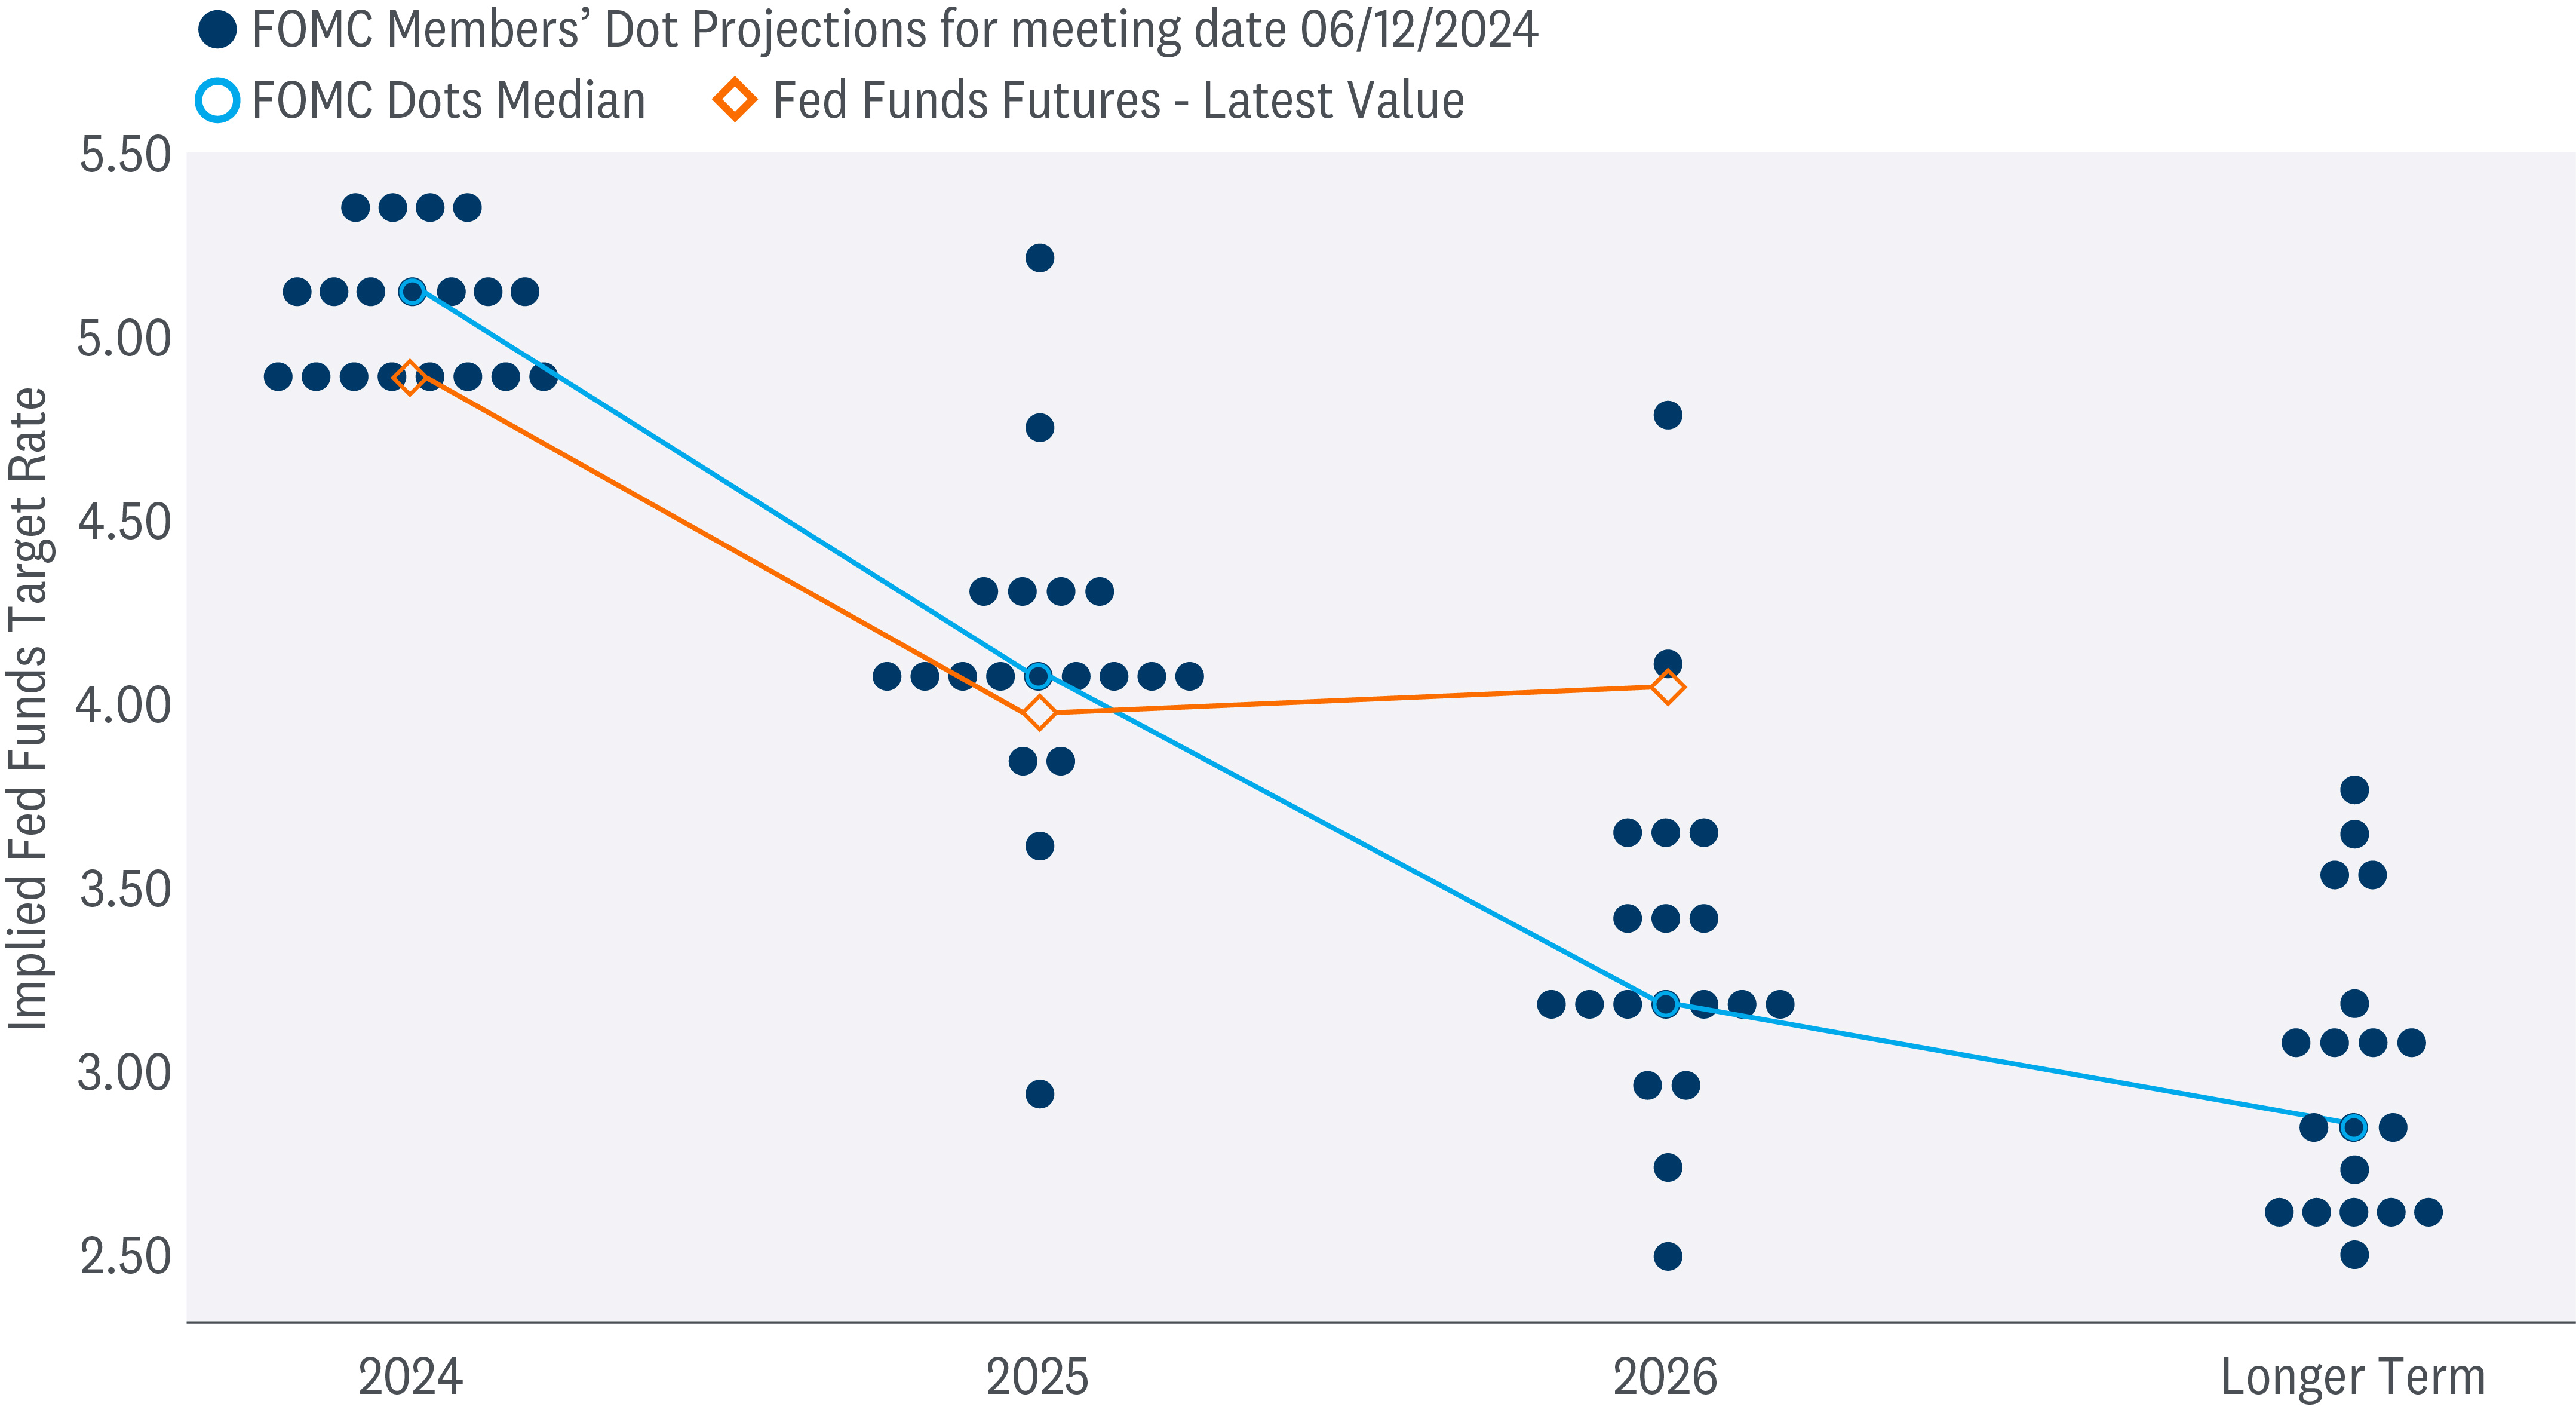 The chart depicts the implied Fed Funds target rate based on FOMC members’ Dot Projections, FOMC Dots Median and Fed Funds Futures, for the meeting date of 06/12/2024. The chart has three lines, each representing a different source of data. The blue line represents the FOMC Dots Median, the orange line represents the Fed Funds Futures - Latest Value, and the dots represent the FOMC Members’ Dot Projections. The chart reveals that the FOMC Dots Median, Fed Funds Futures - Latest Value, and FOMC Members’ Dot Projections all project that the Fed Funds target rate will decline over time. The FOMC Dots Median projects a more aggressive decline than the Fed Funds Futures, and the FOMC Members’ Dot Projections are more dispersed.